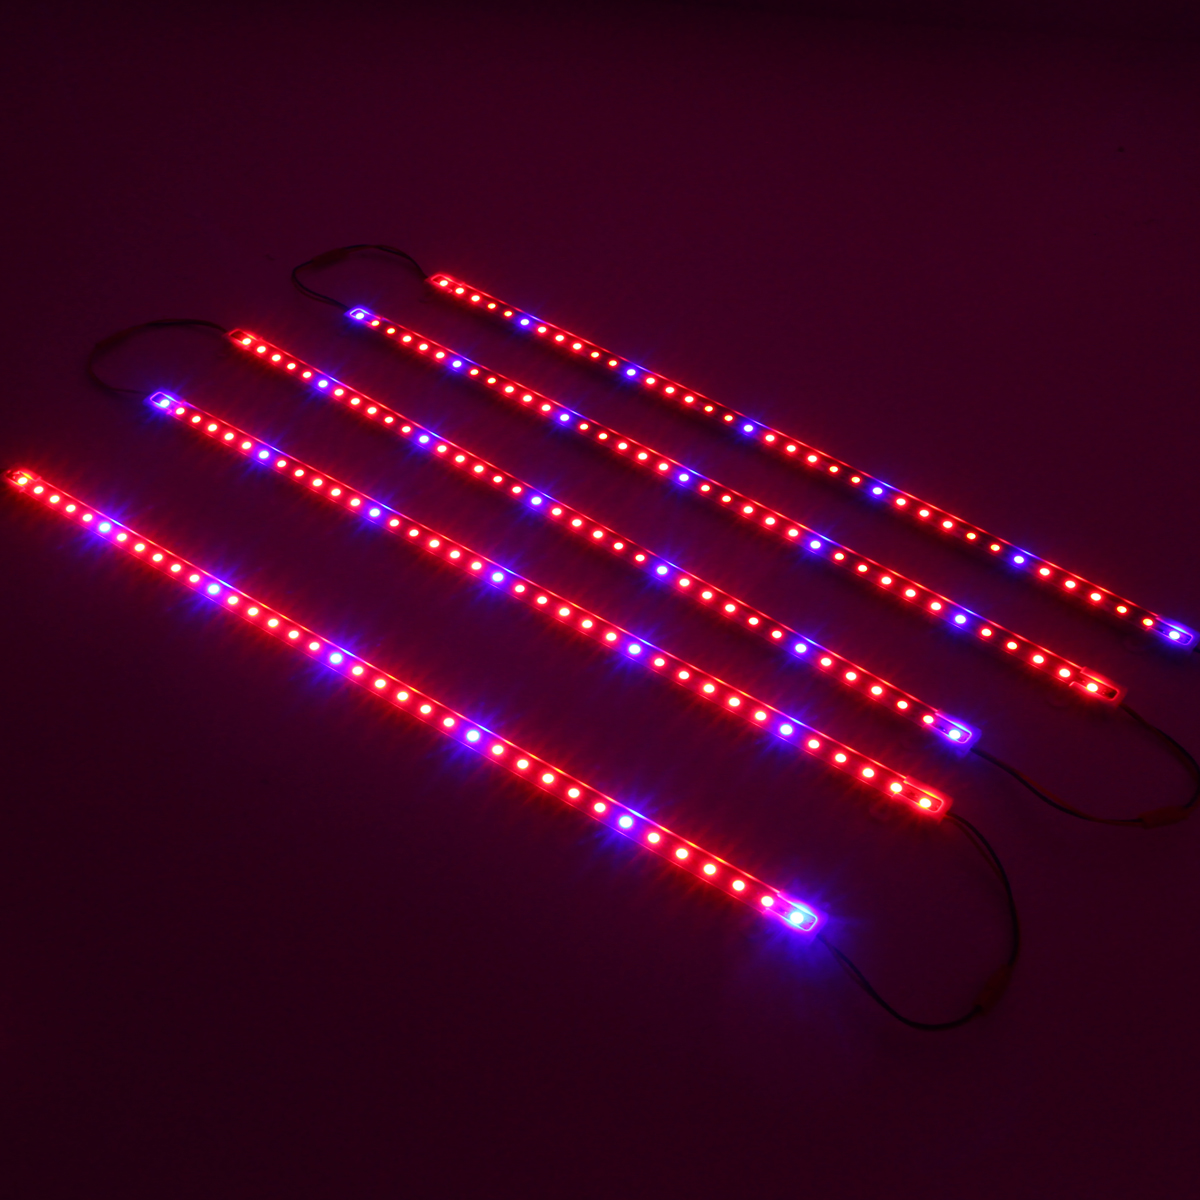 5PCS-50CM-SMD5050-RedBlue-51-Grow-Plant-LED-Strip-Light-with-Connector-for-Greenhouse-DC12V-1285483-6